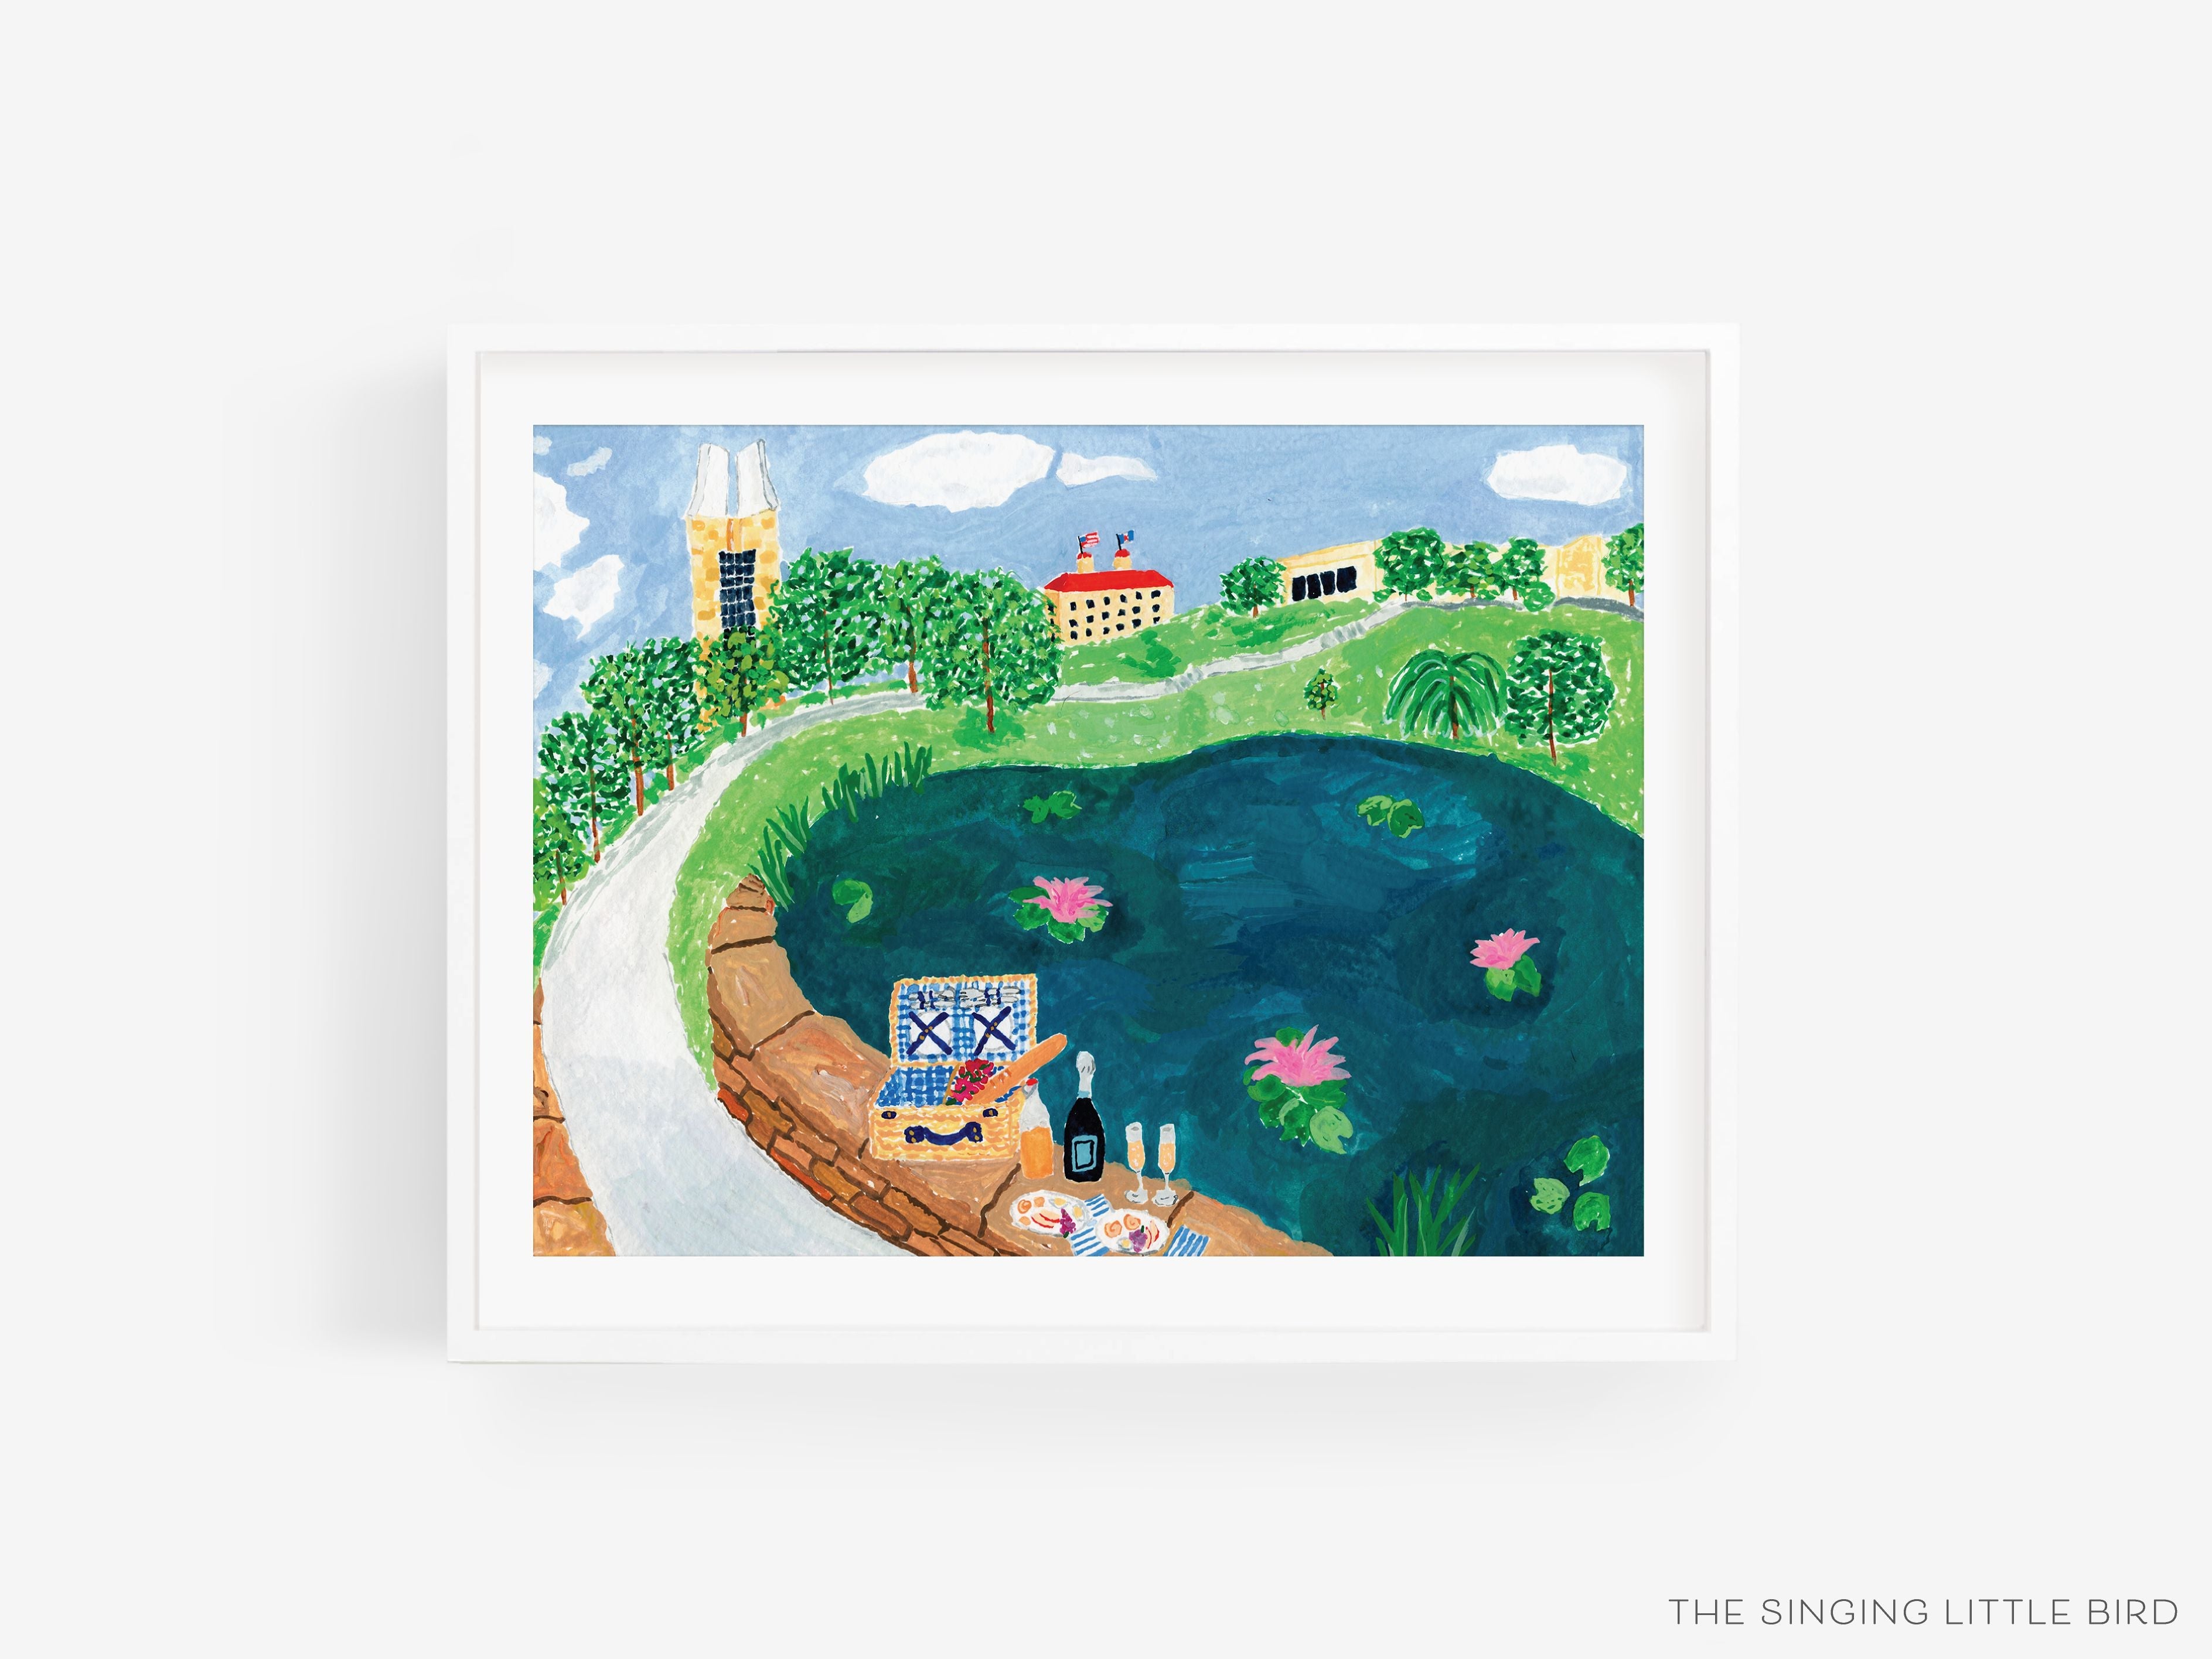 Brunch On a Bridge KU Art Print [Officially Licensed Product]-This watercolor art print features our hand-painted Picnic at Potter Lake, printed in the USA on 120lb high quality art paper. This makes a great gift or wall decor for the KU student or graduate in your life.-The Singing Little Bird